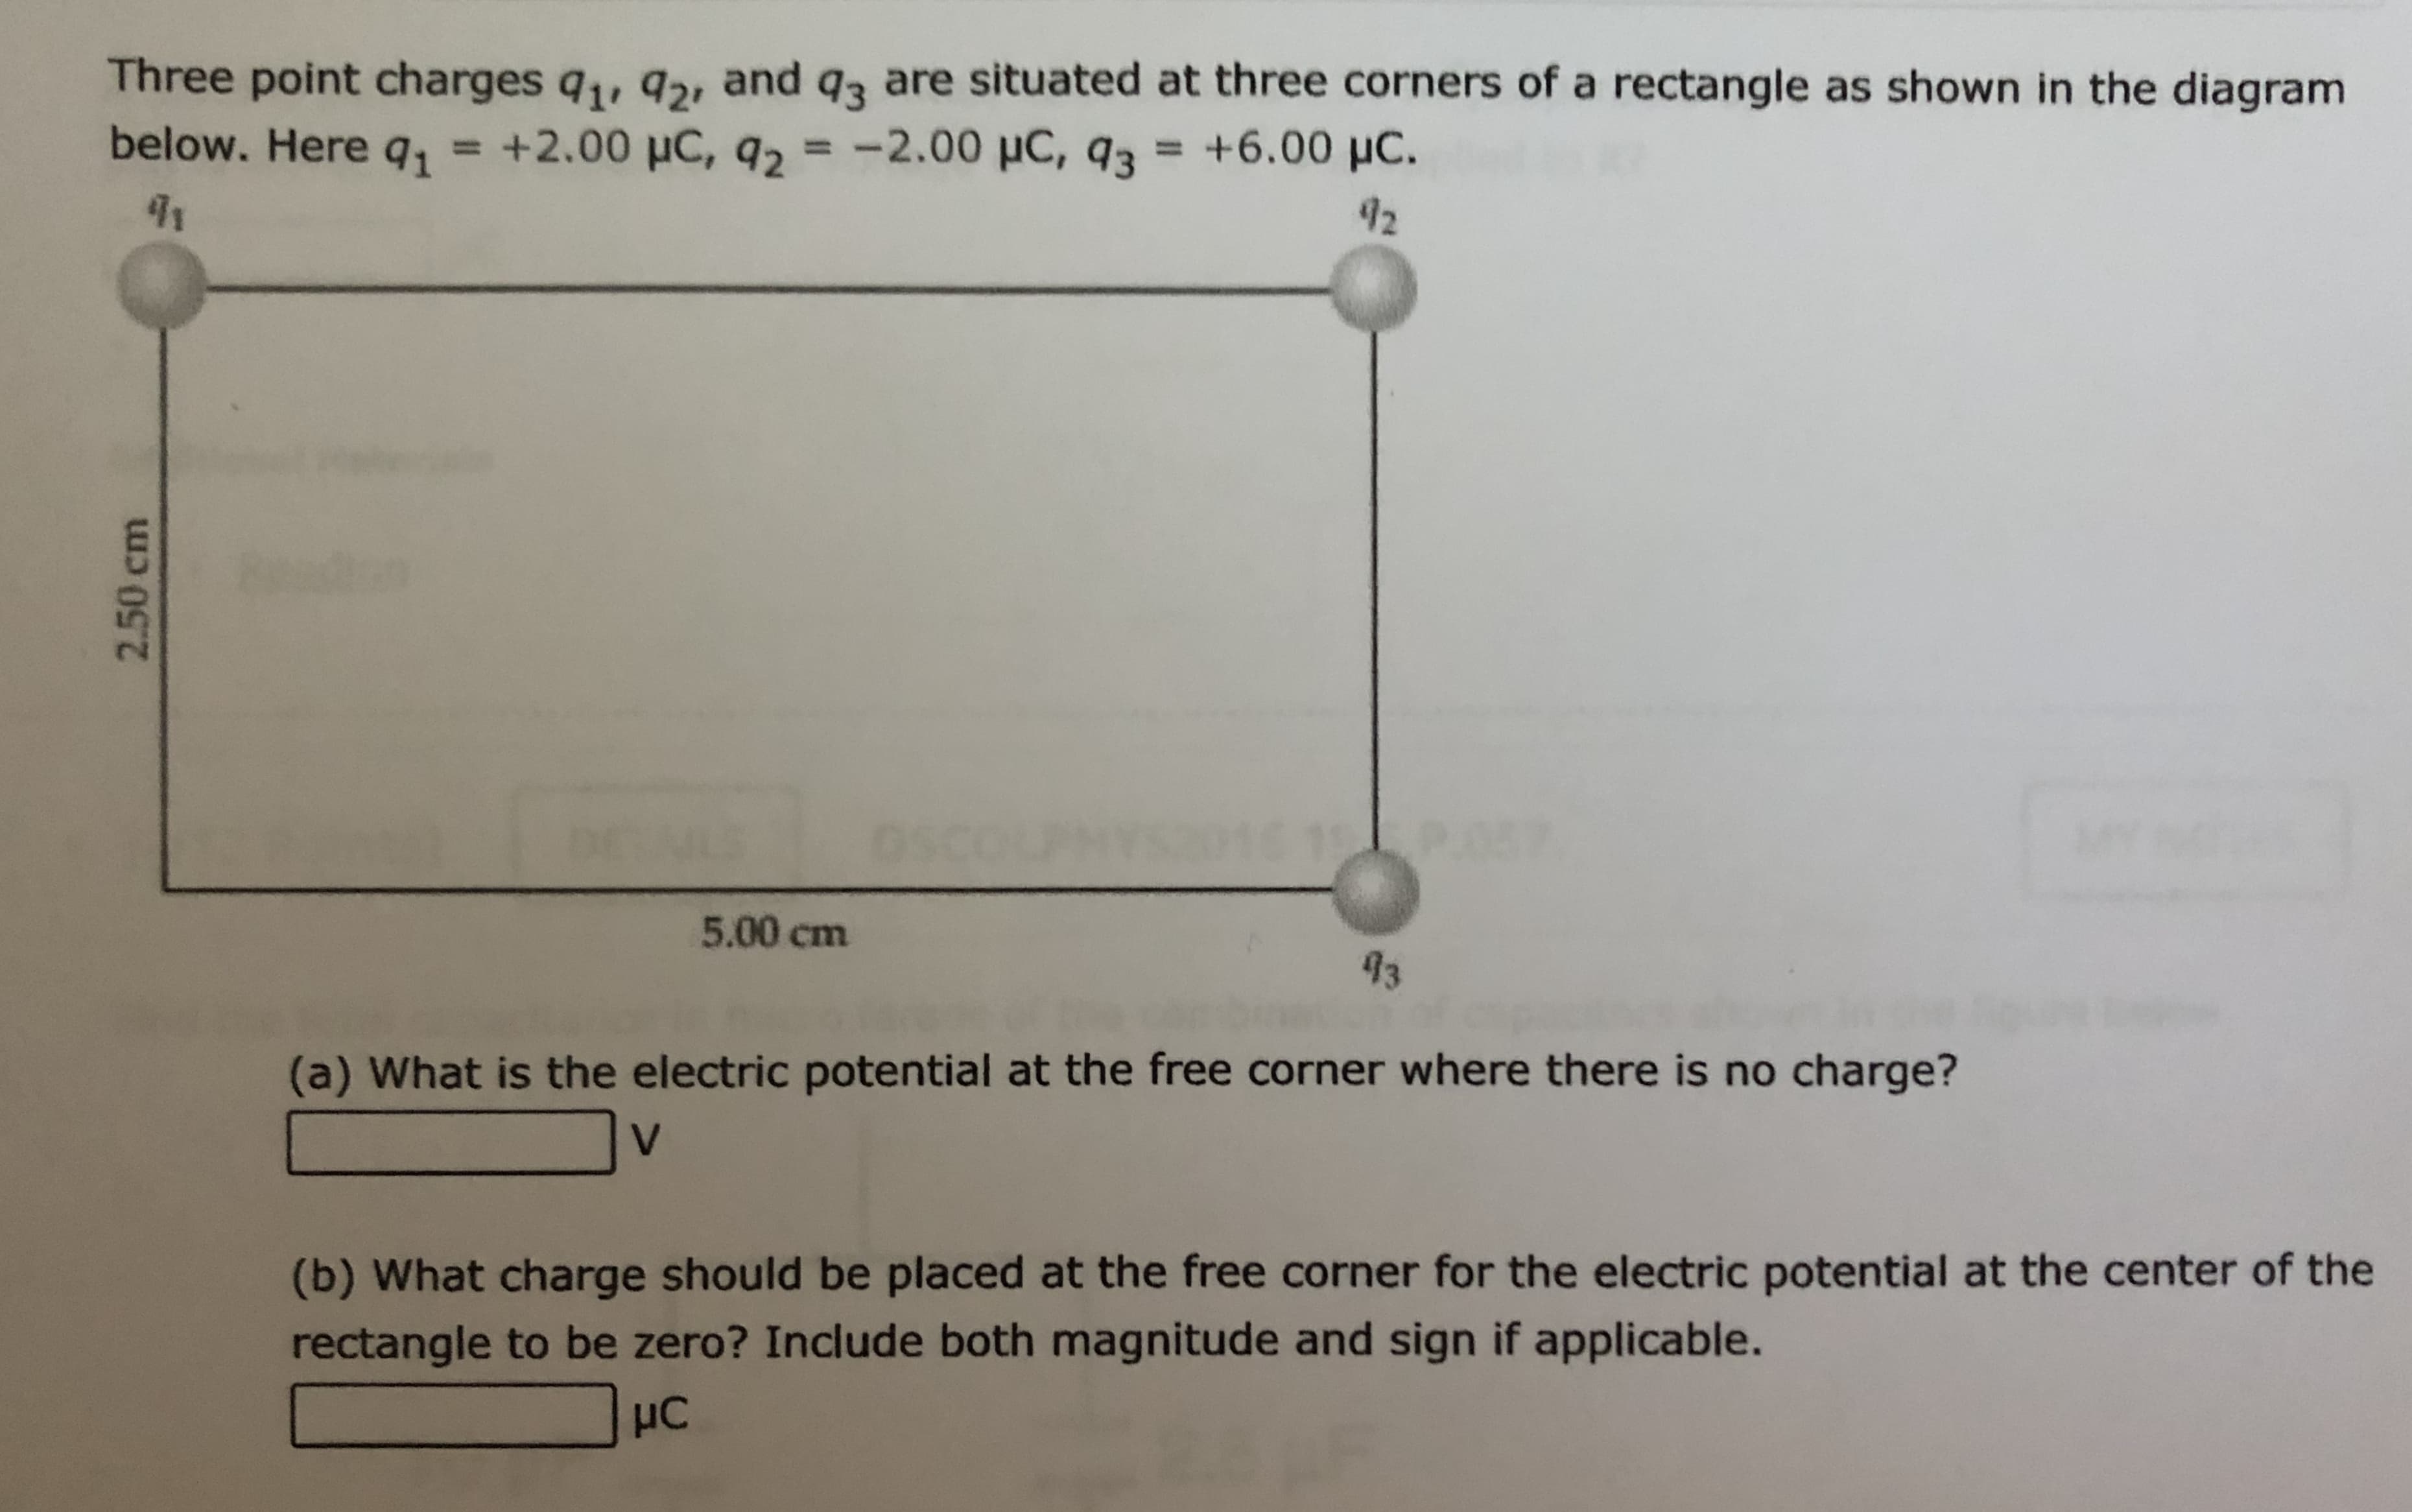 (a) What is the electric potential at the free corner where there is no charge?
V
(b) What charge should be placed at the free corner for the electric potential at the center of the
rectangle to be zero? Include both magnitude and sign if applicable.
HC
